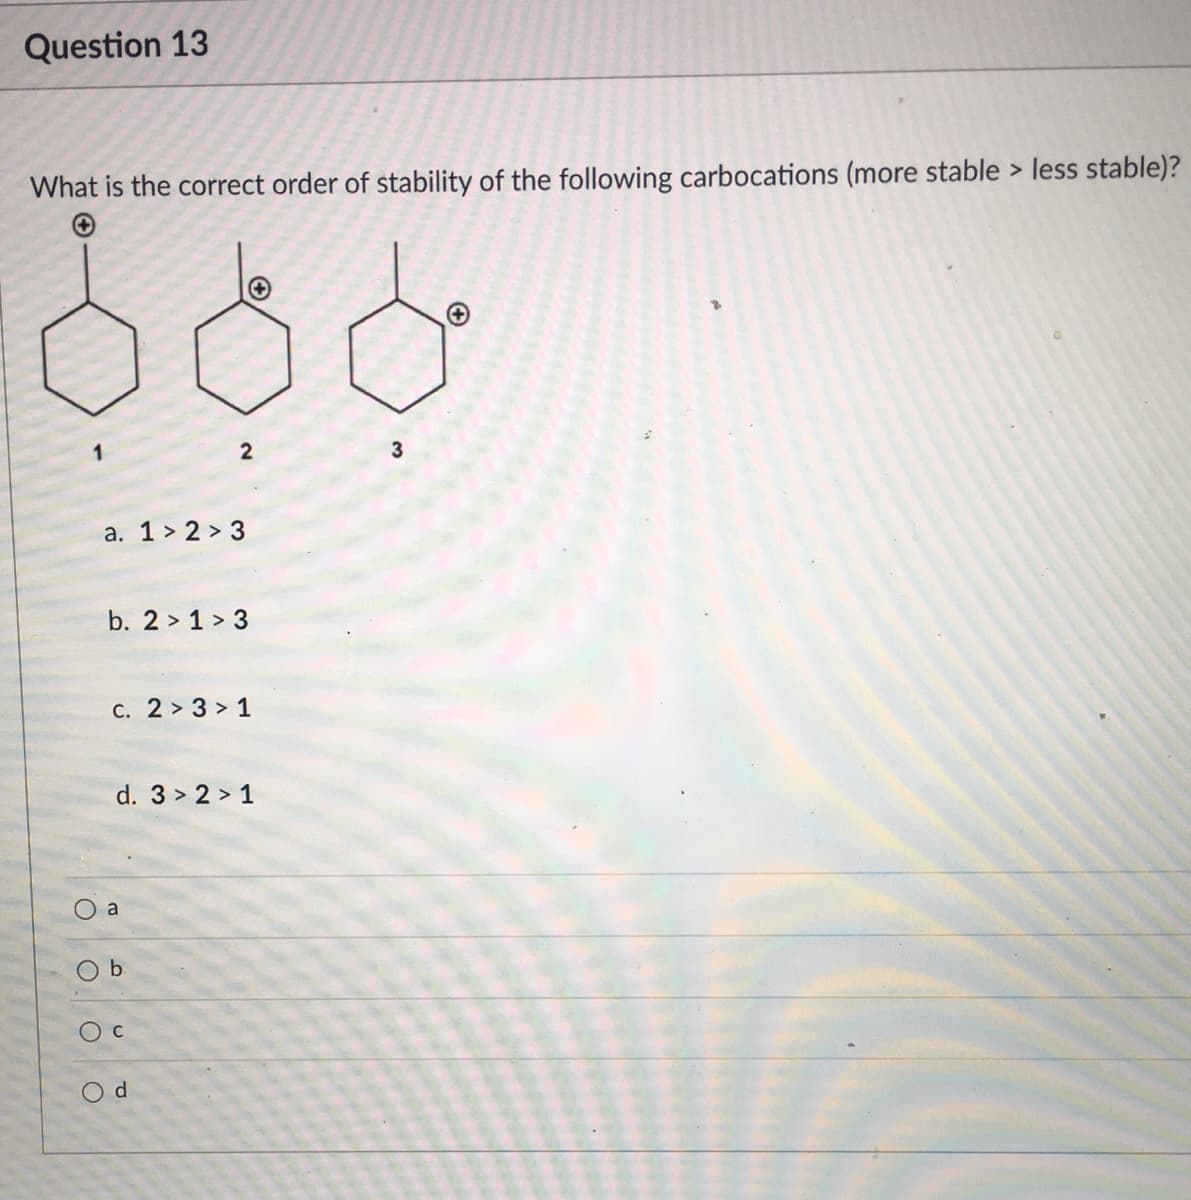 Question 13
What is the correct order of stability of the following carbocations (more stable > less stable)?
3
a. 1 > 2 > 3
b. 2 > 1 > 3
C. 2 > 3 > 1
d. 3 > 2 > 1
a
b.
Oc
